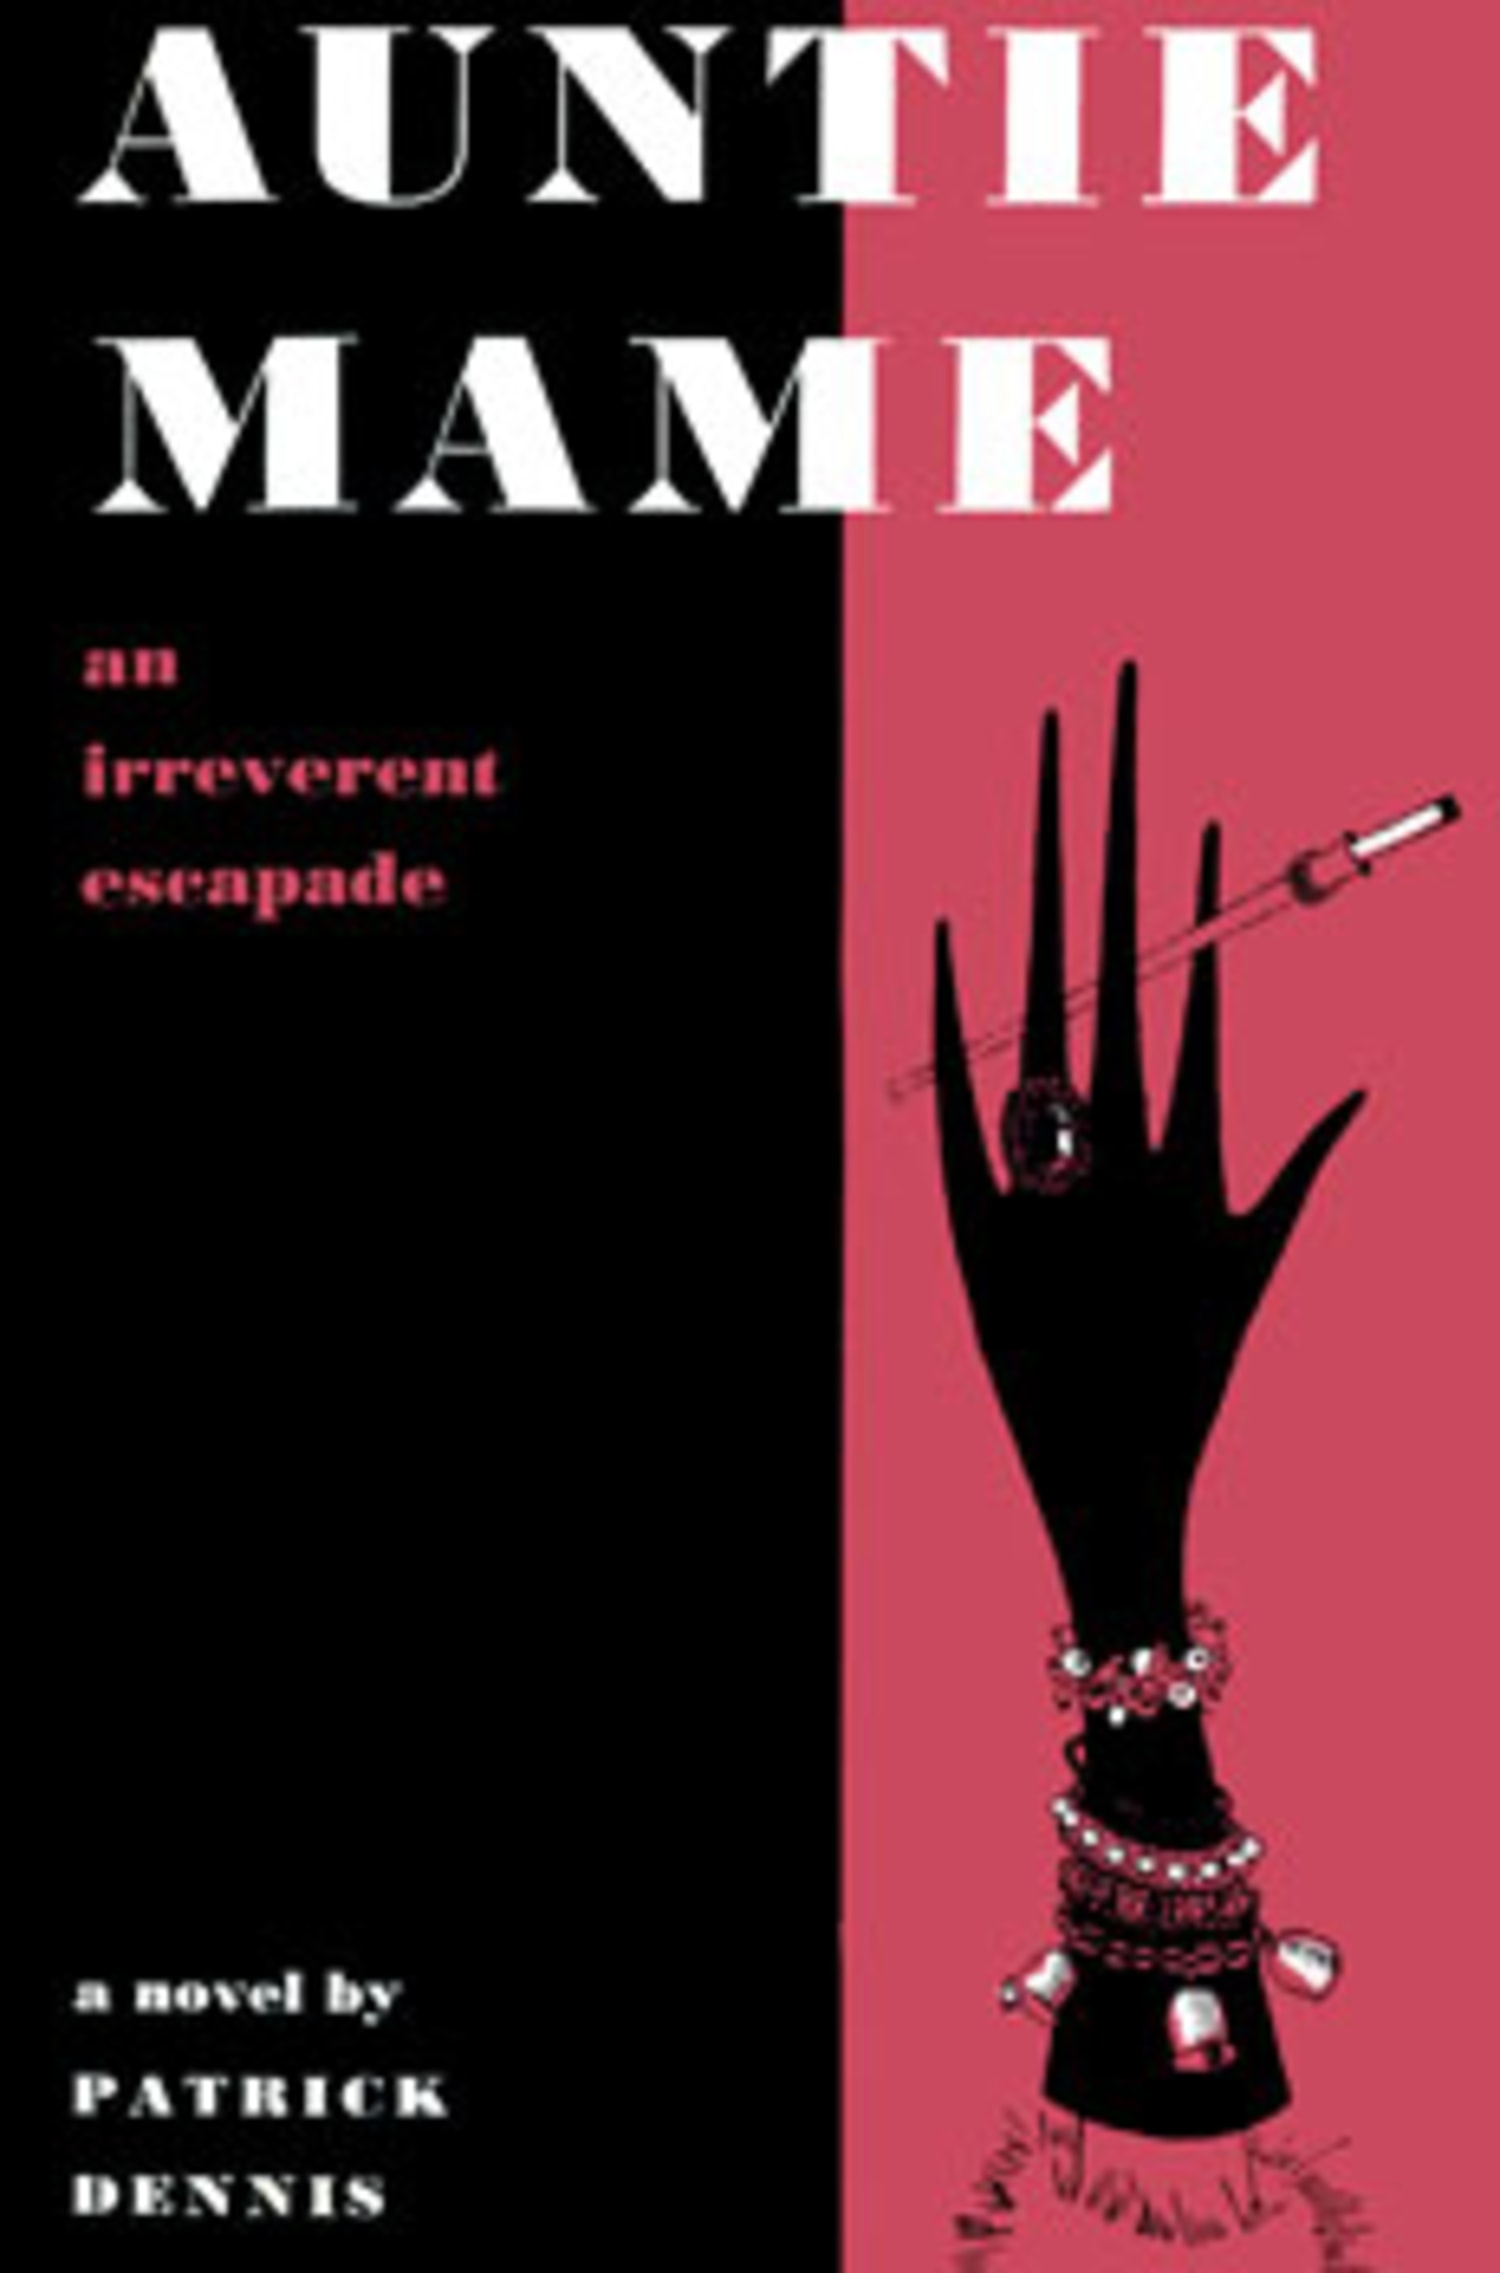 X Sister Mame Videos - Opinion: Why 'Auntie Mame' Has Resonated With Generations of Gay Men